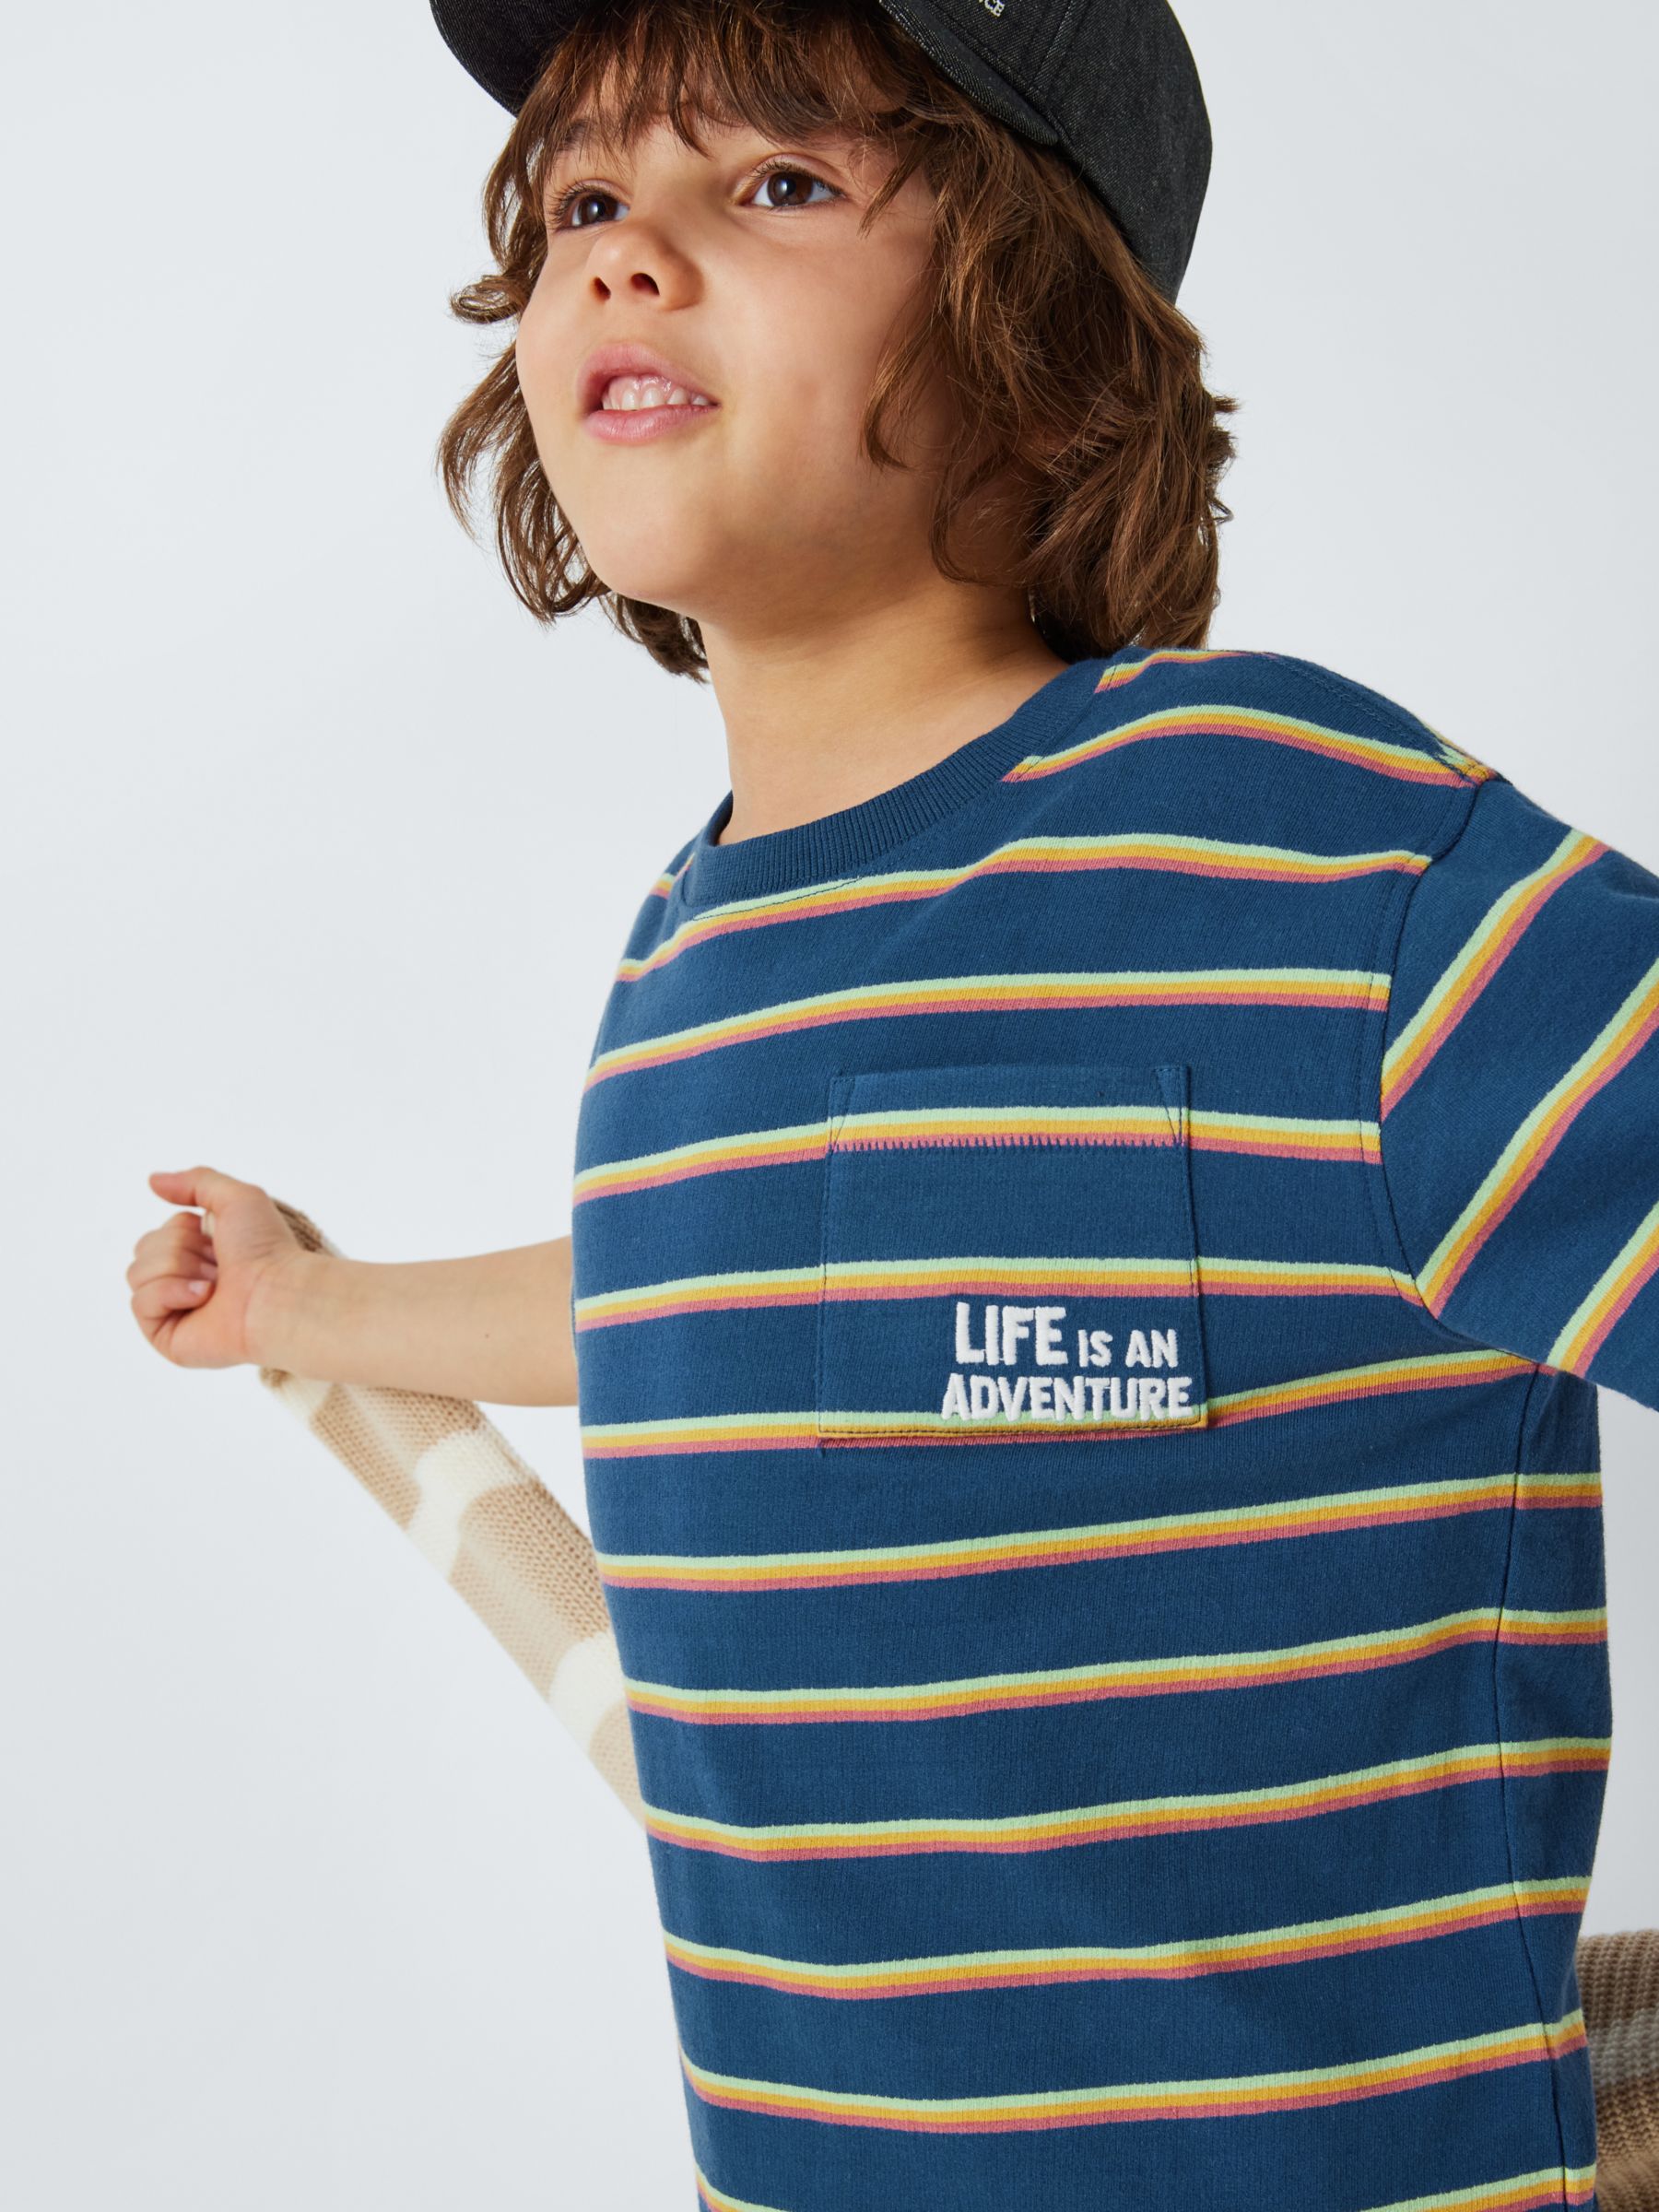 John Lewis Kids' Embroidered Graphic Life Is An Adventure Stripe T-Shirt, Blue, 10 years